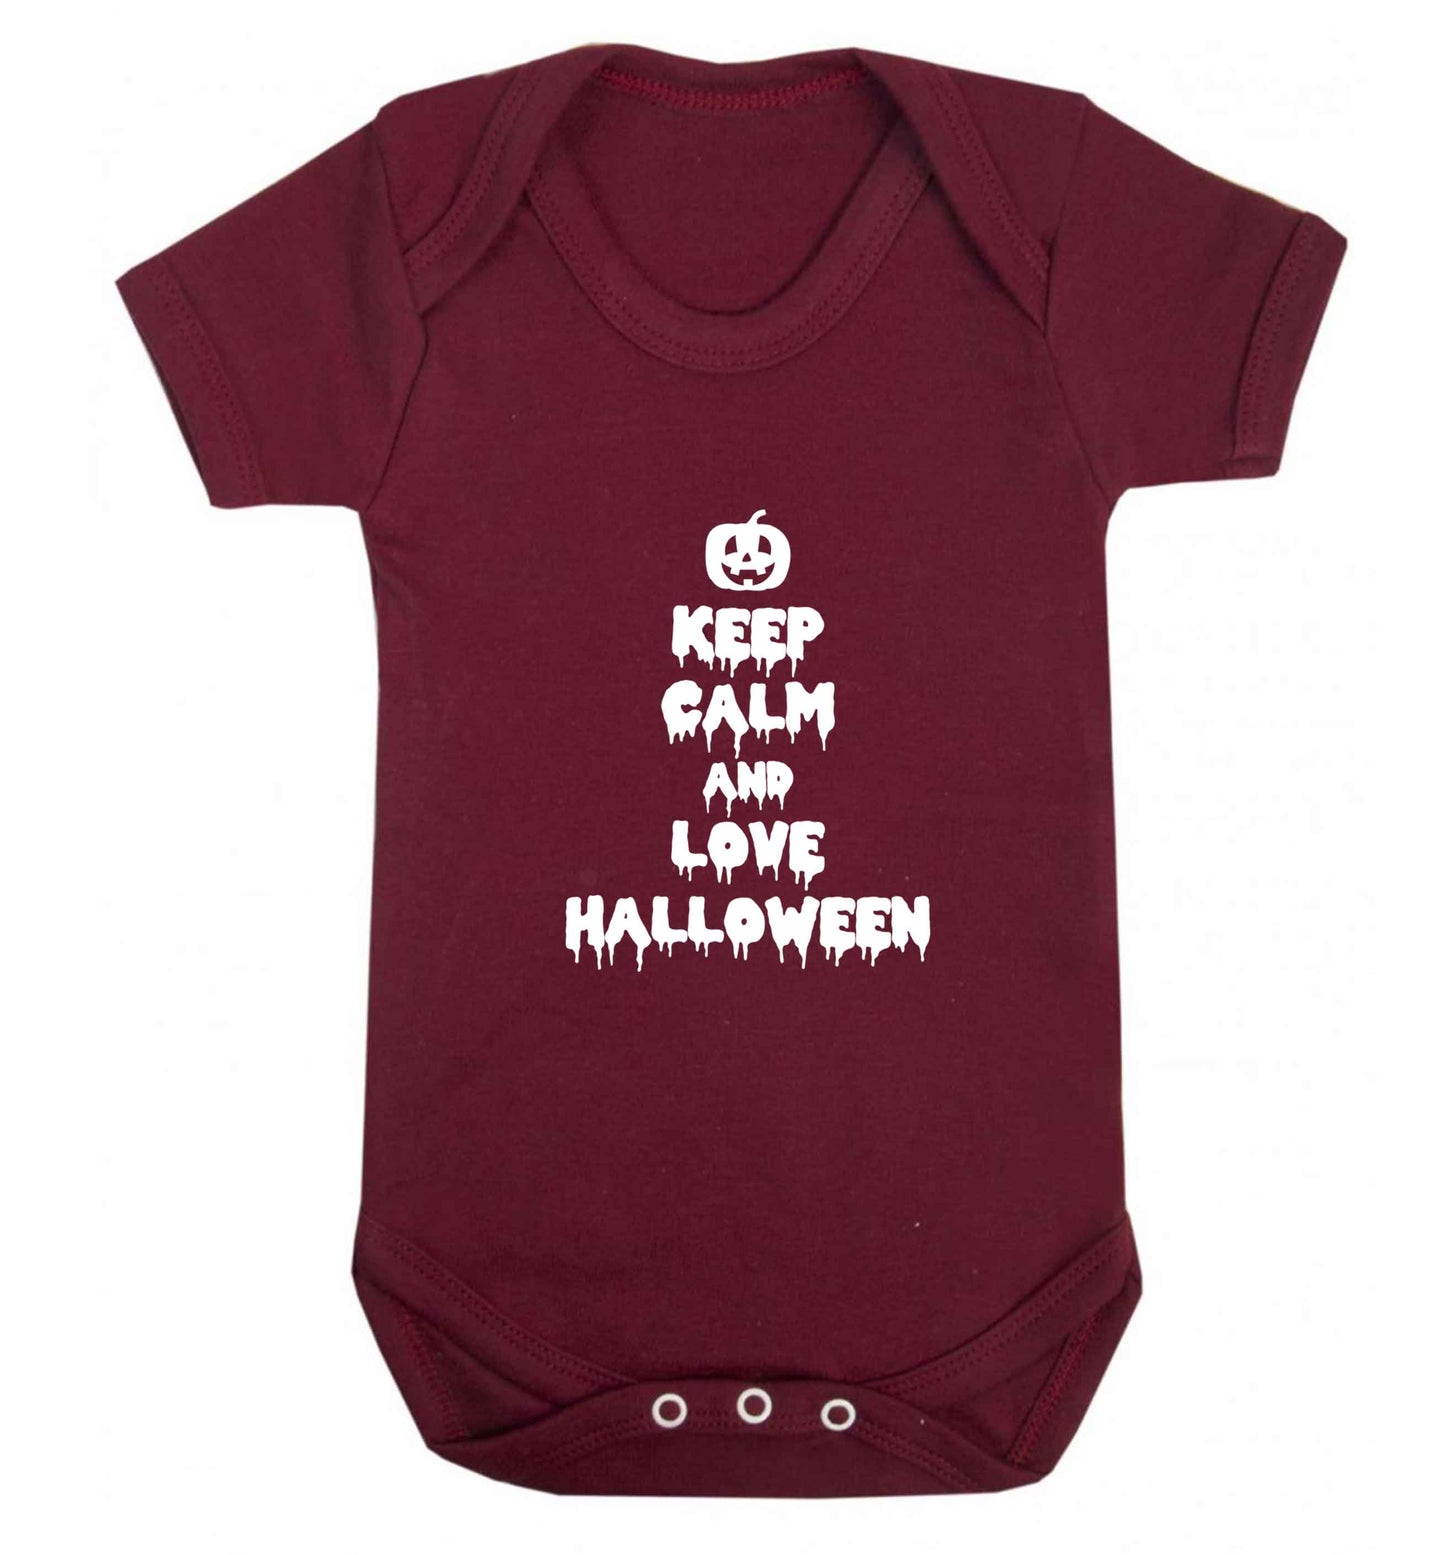 Keep calm and love halloween baby vest maroon 18-24 months